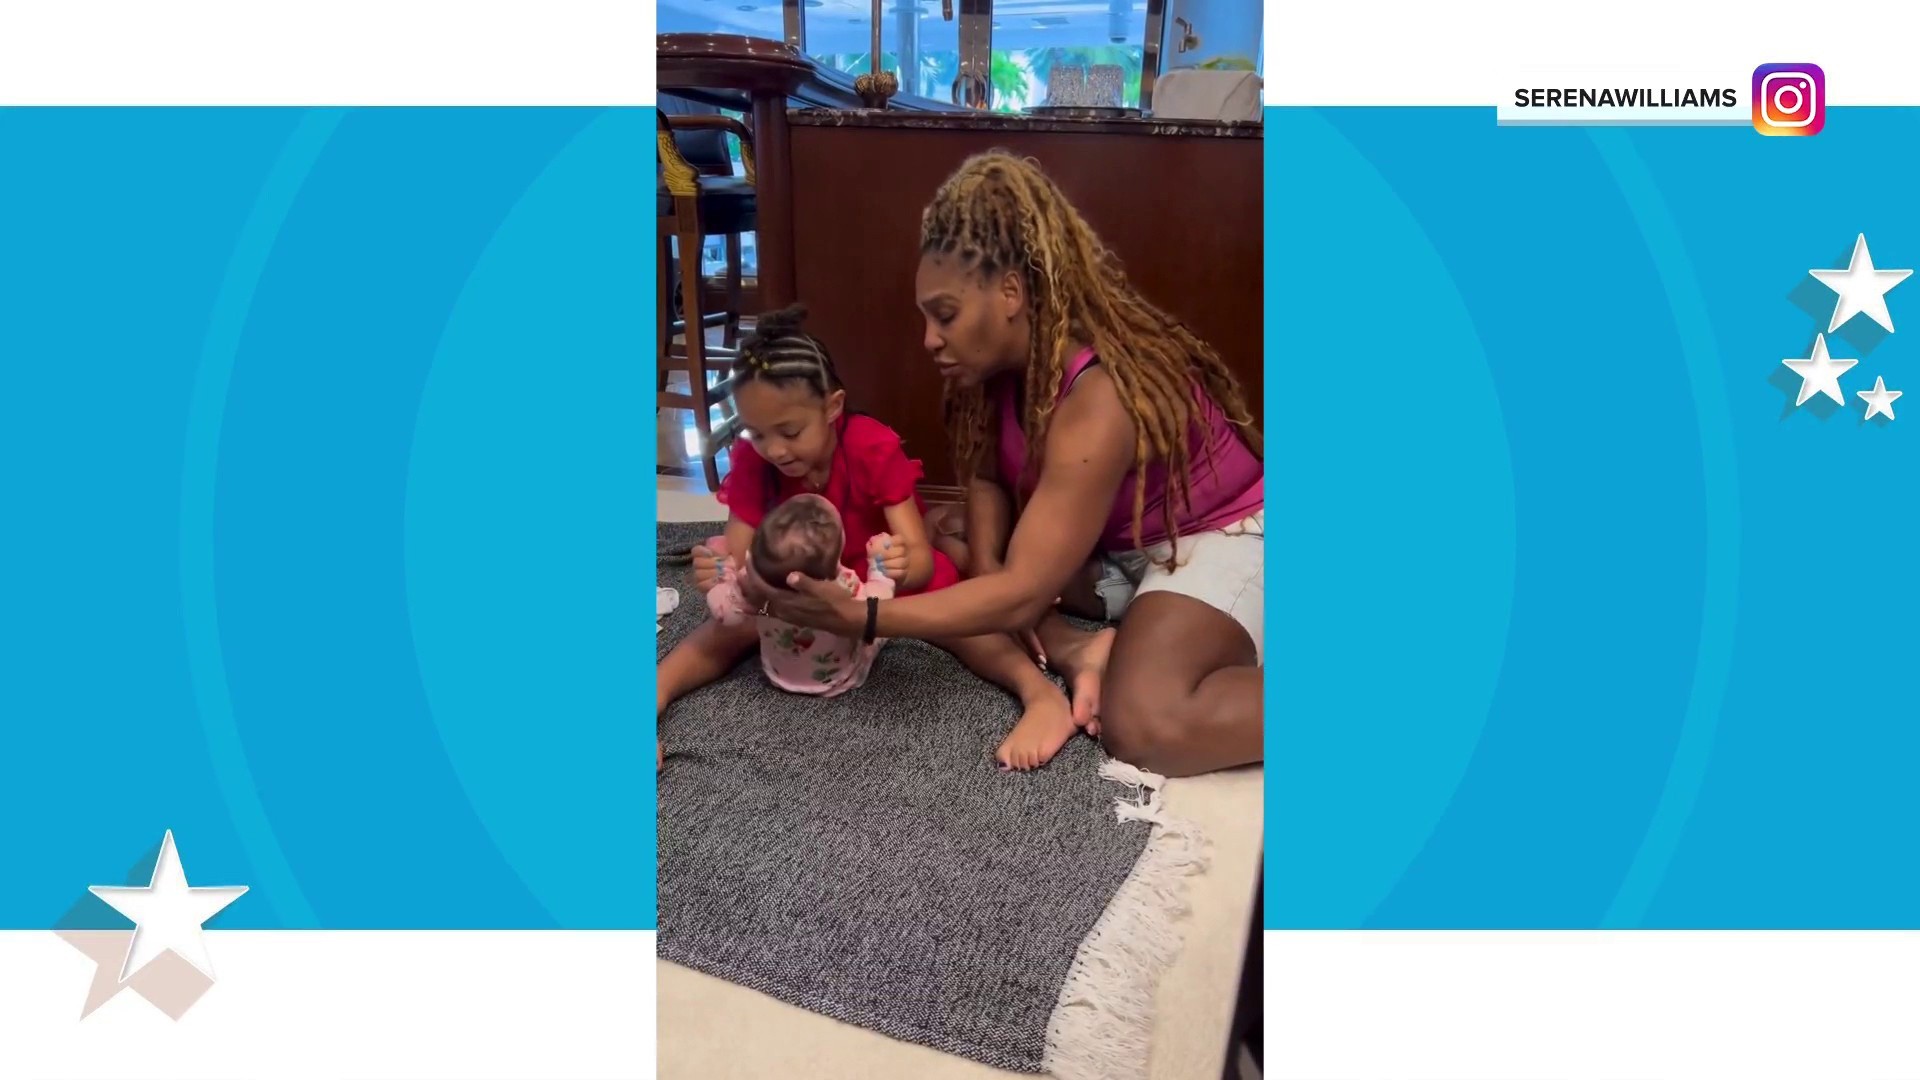 Serena Williams shares 4-month-old daughter's cute baby workout